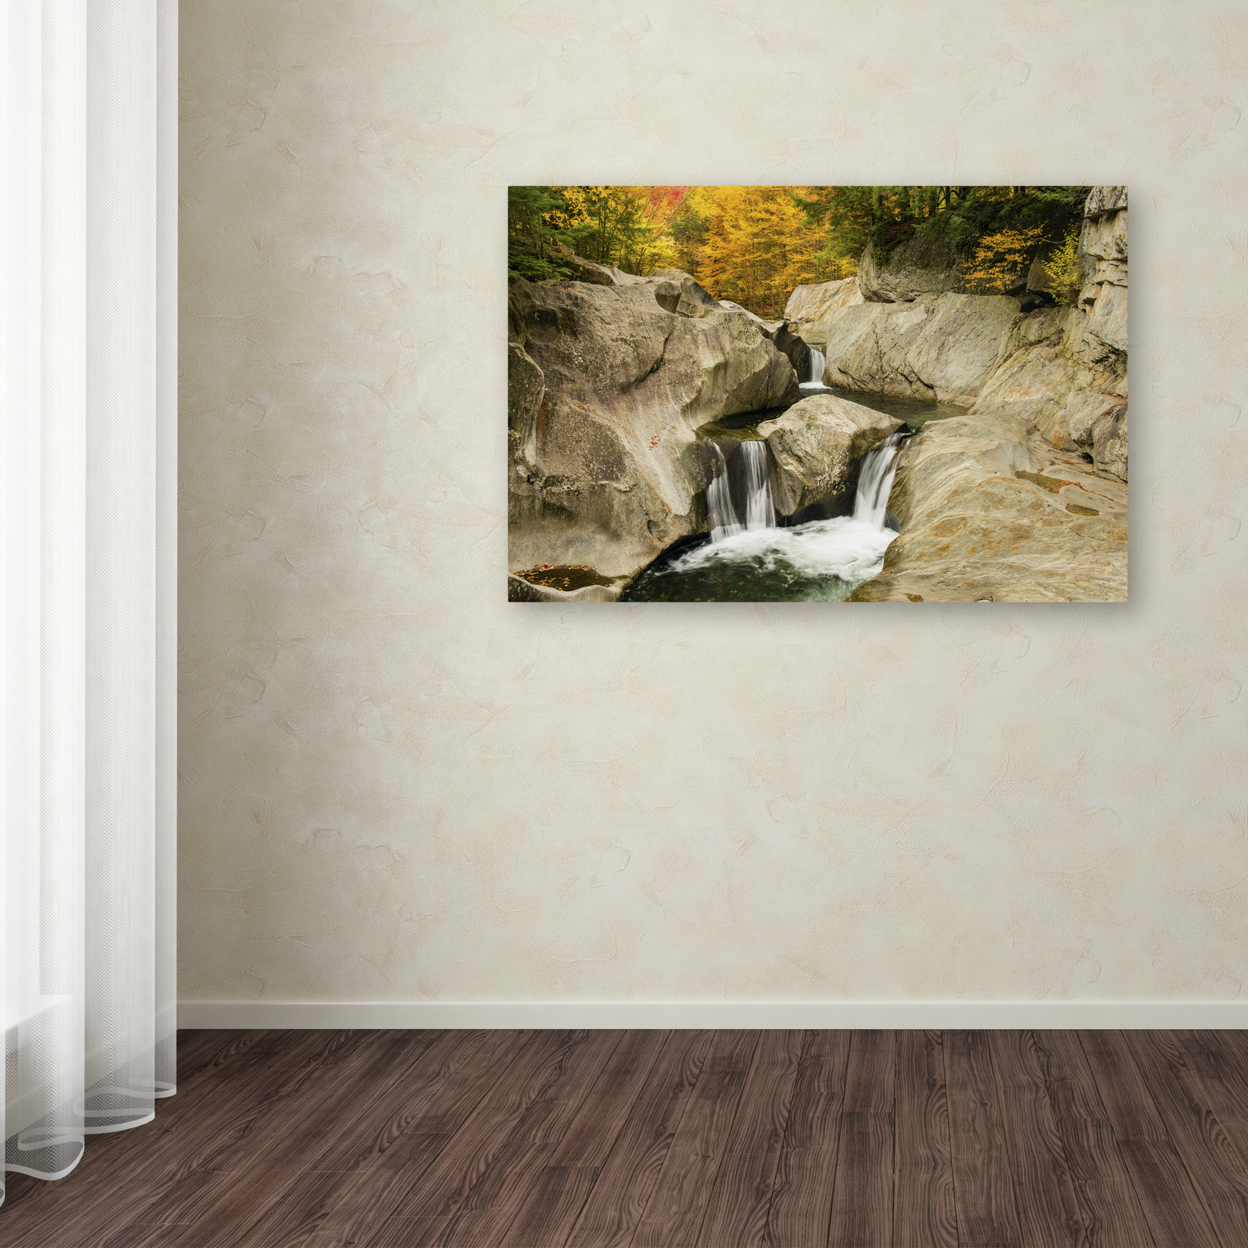 Michael Blanchette Photography 'Fall At The Falls' Canvas Art 16 X 24